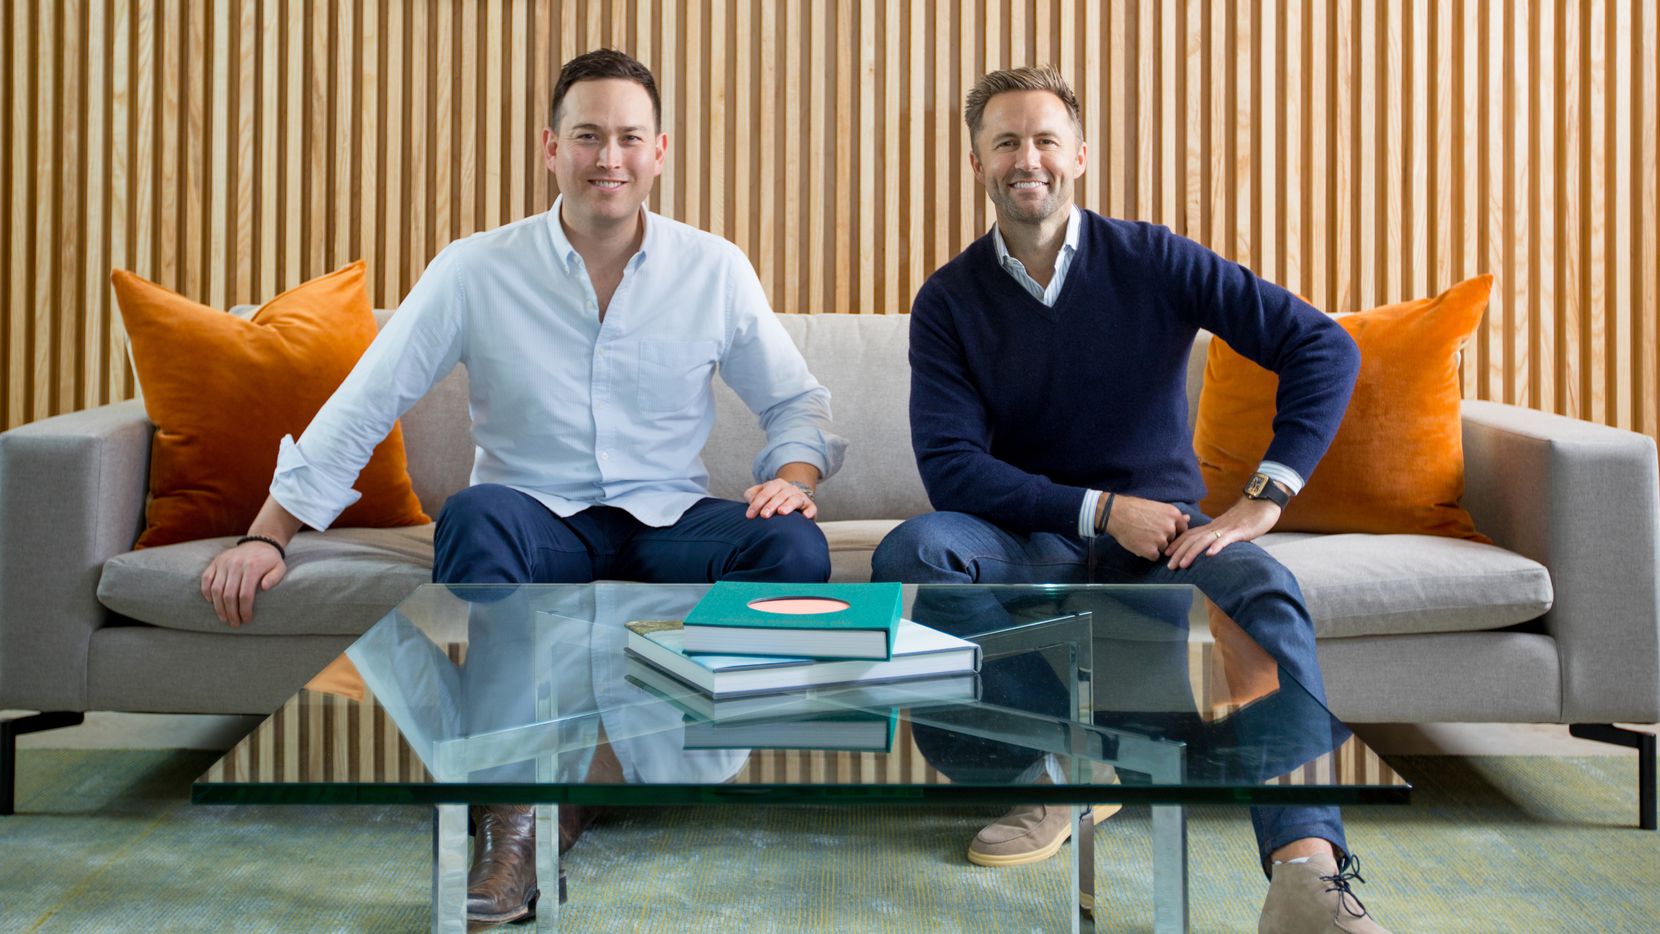 Jonathan Abelmann (left) and Melbourne O'Banion are co-founders of Dallas-based digital life...